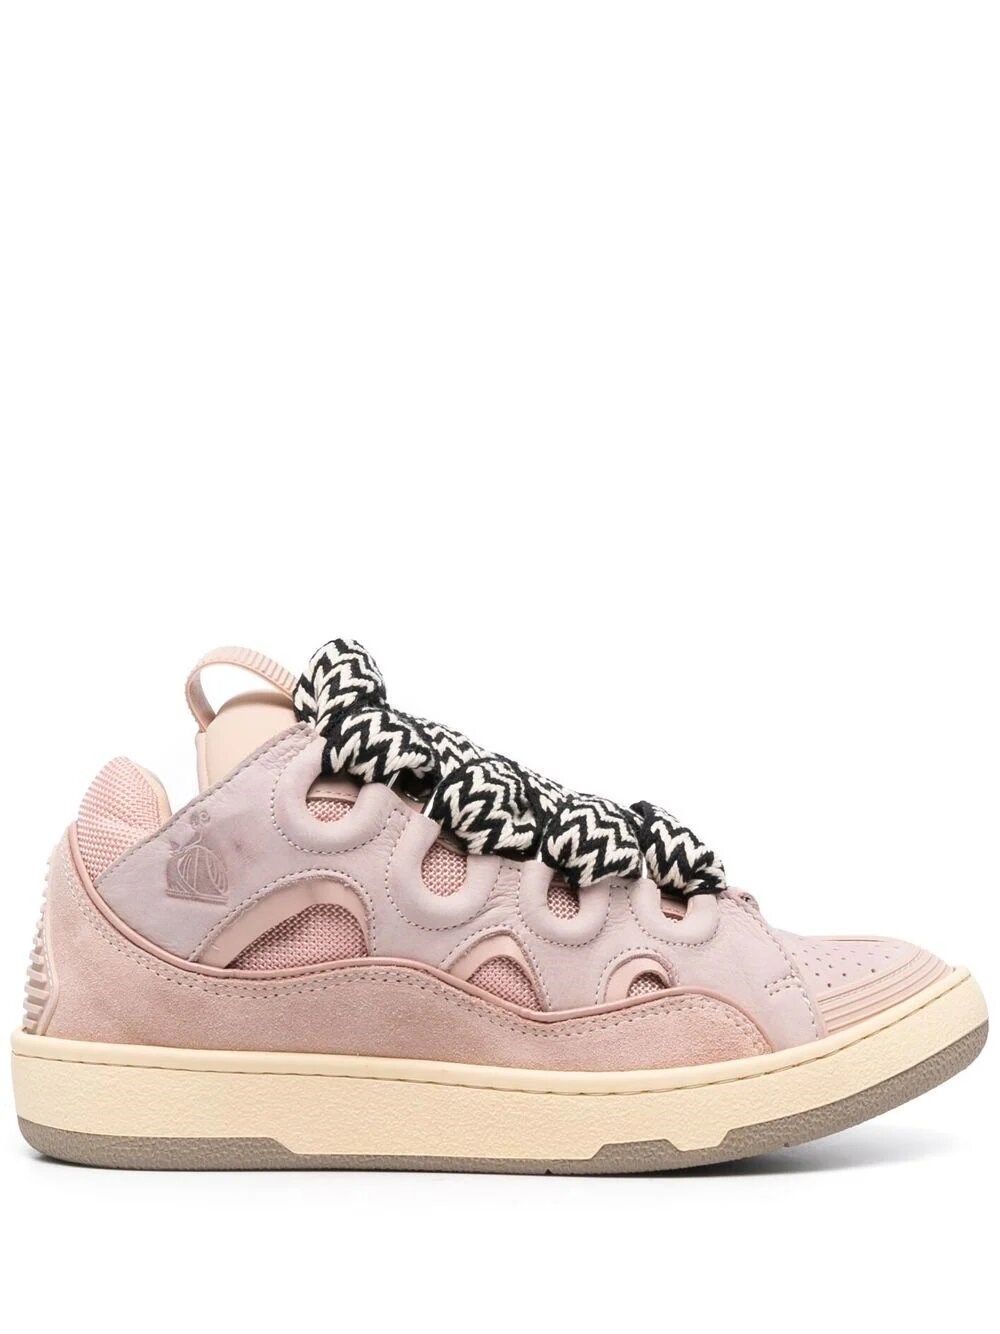 Lanvin Curb Light Trainers In Pink